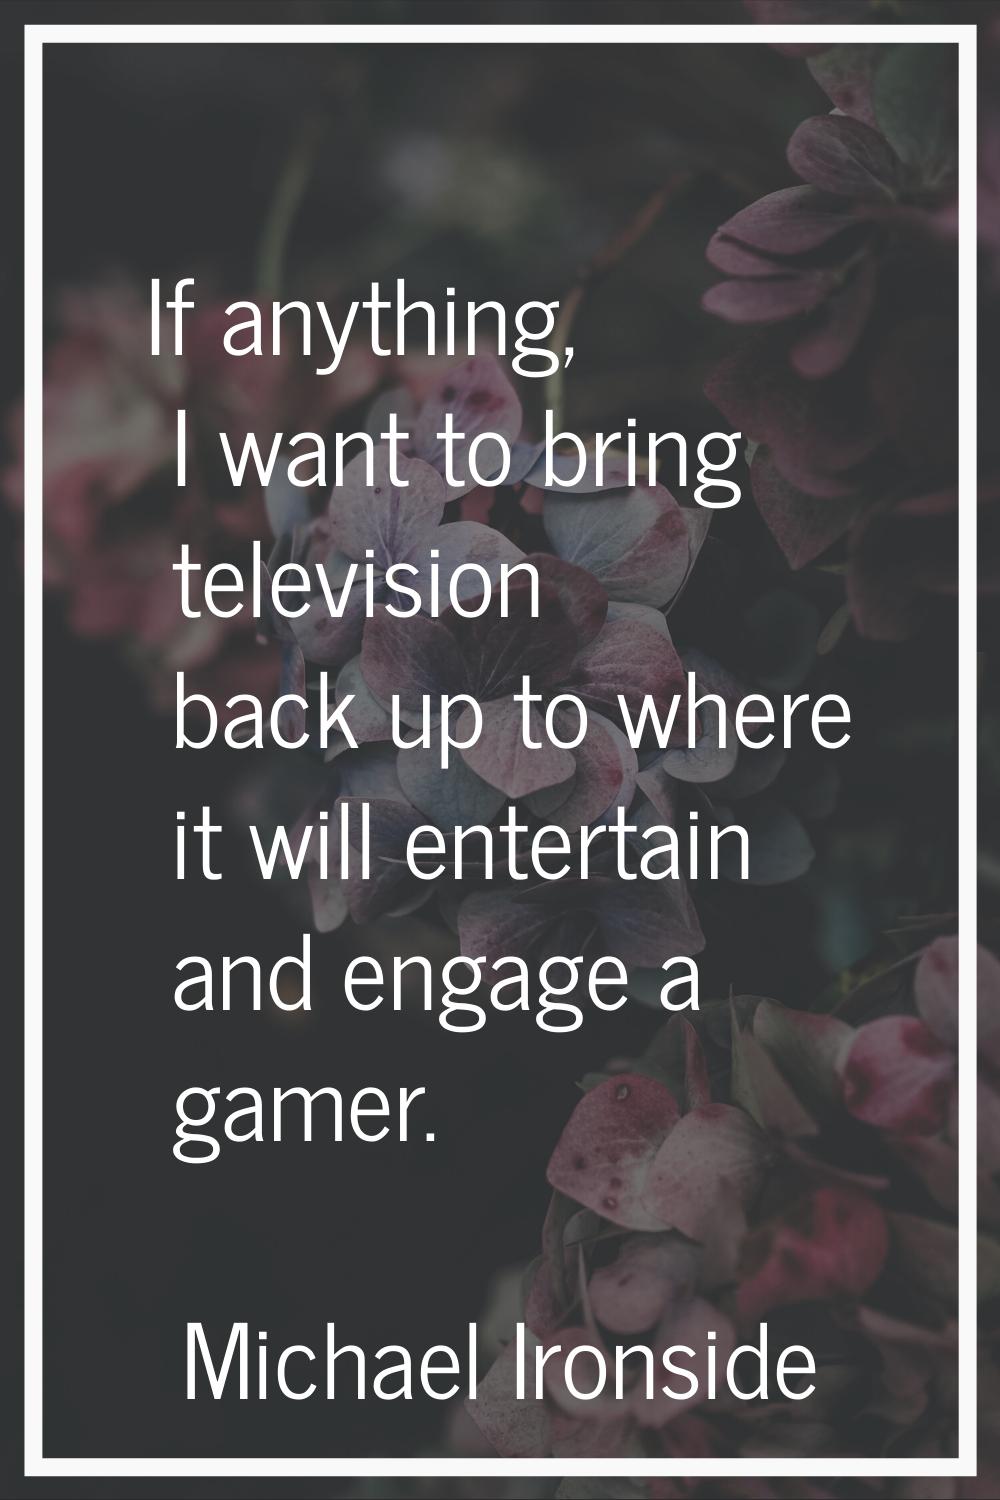 If anything, I want to bring television back up to where it will entertain and engage a gamer.